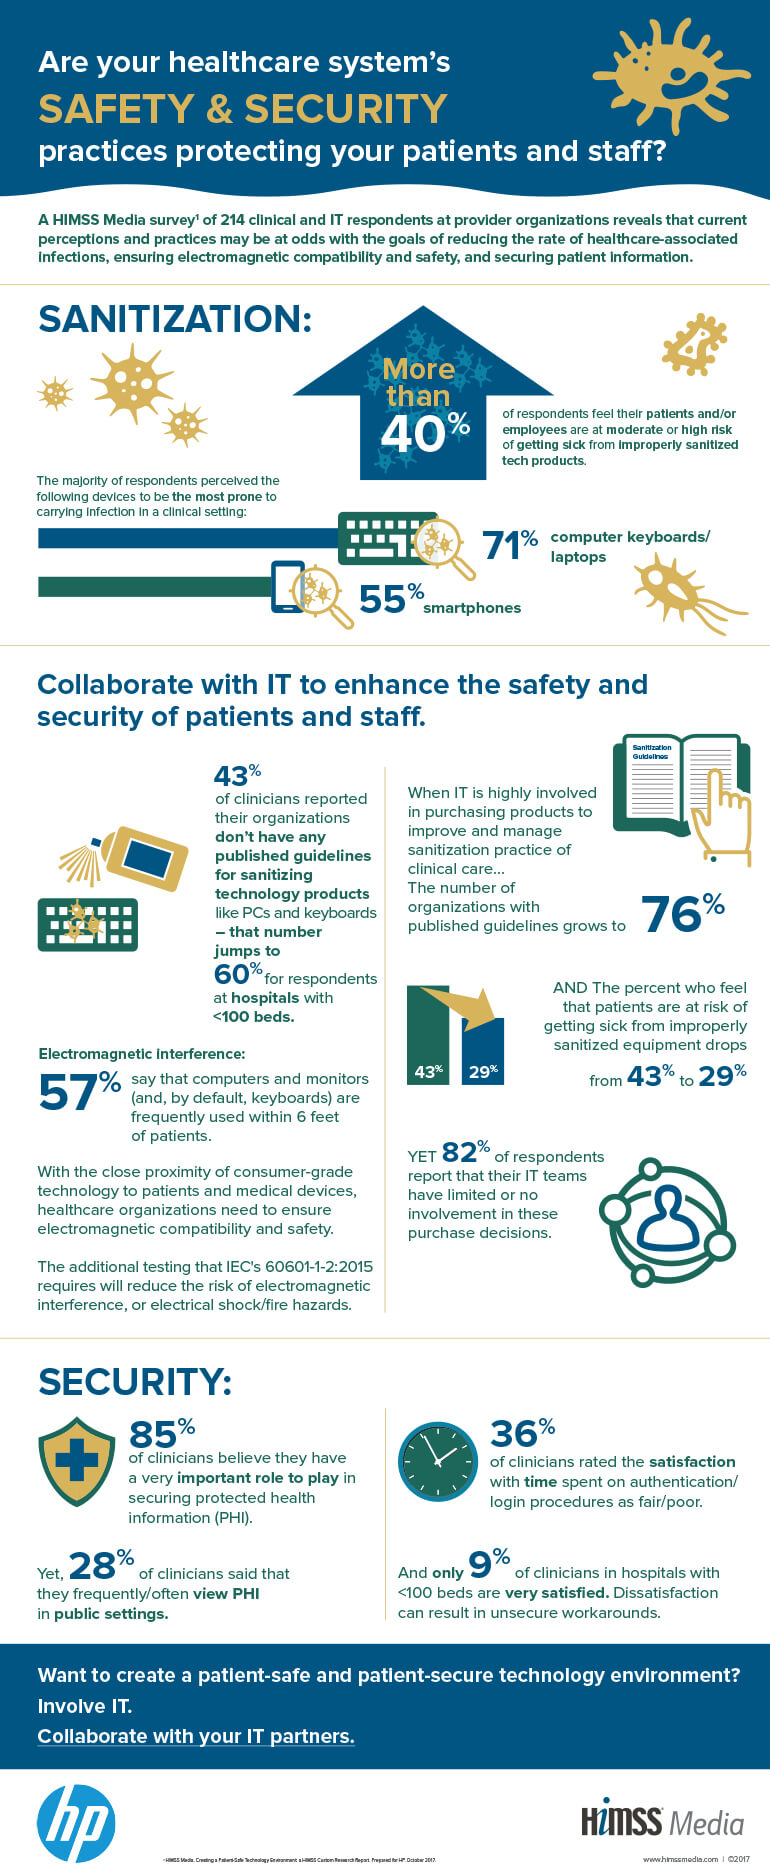 Infographic for HP's Healthcare Systems Safety and Security